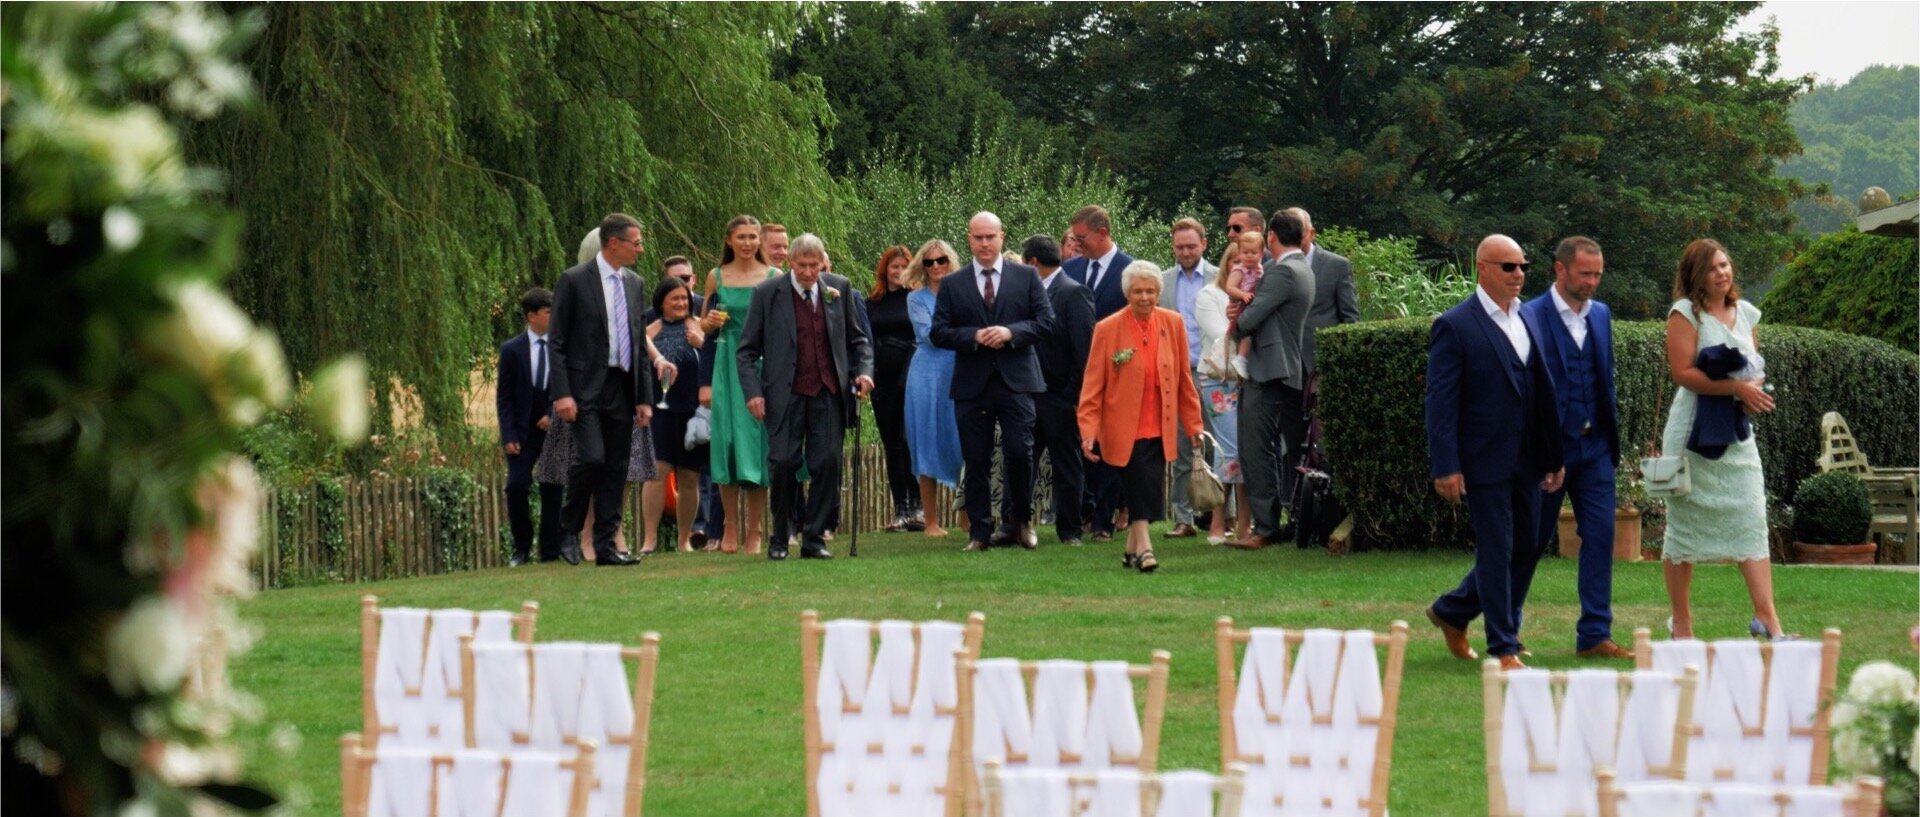 Ceremony outside at quendon hall essex videograhpy .jpg